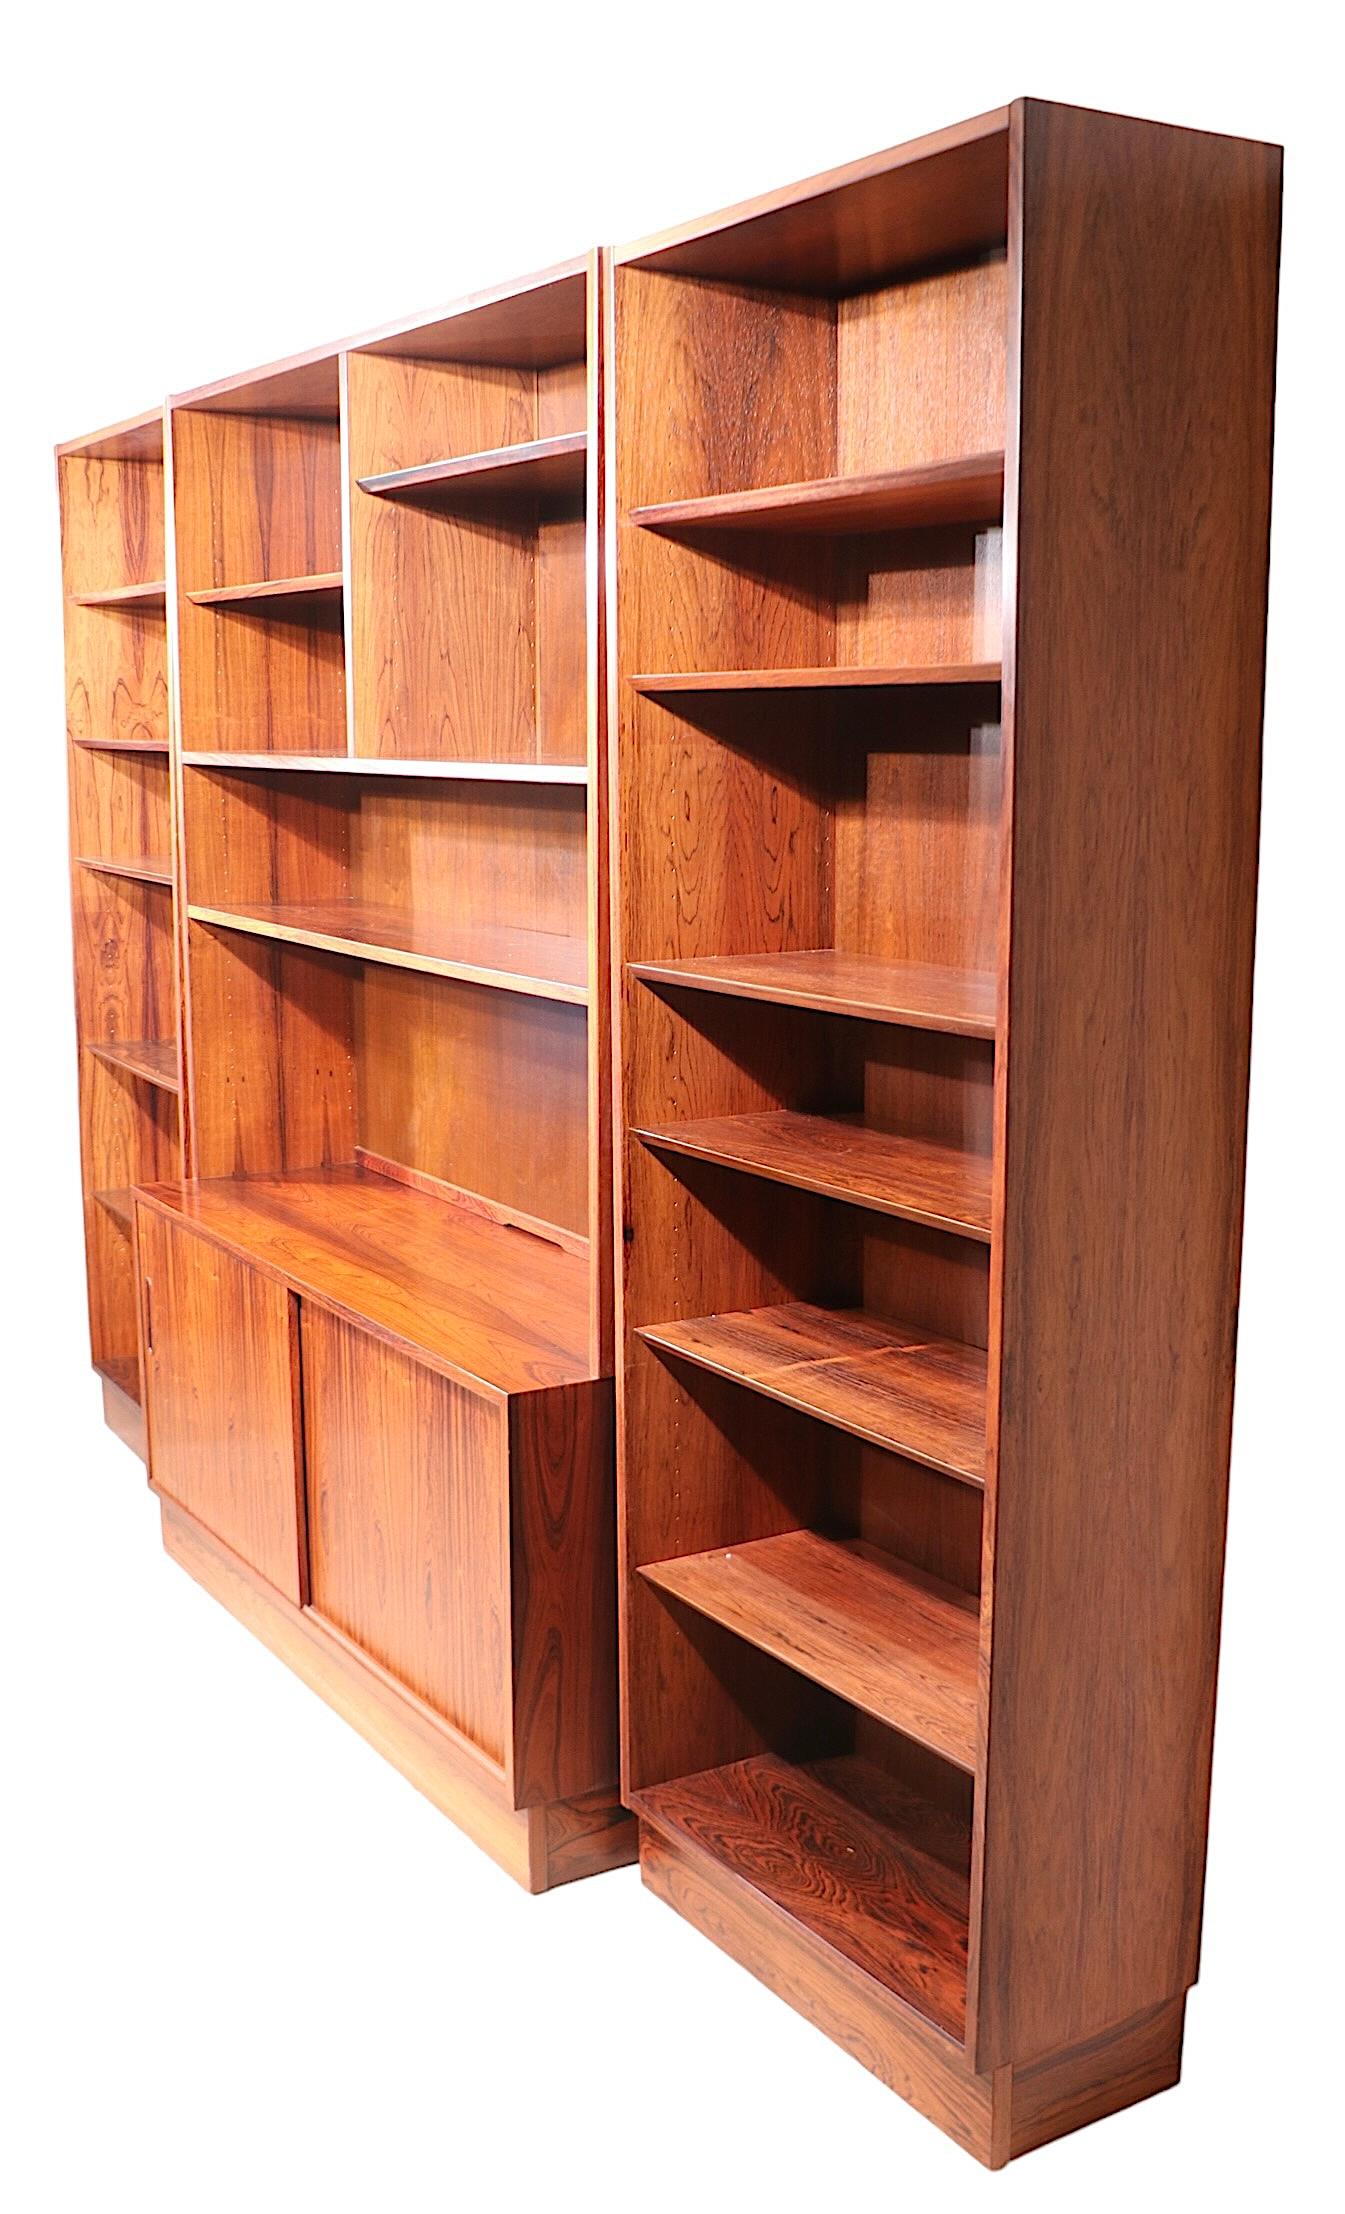 Spectacular  Mid Century Modern bookcase wall unit designed by Poul Hundevad, made in Denmark c 1960's. The wall unit consists of three separate freestanding cabinets, two smaller side pieces, and the larger middle section.  Middle section features